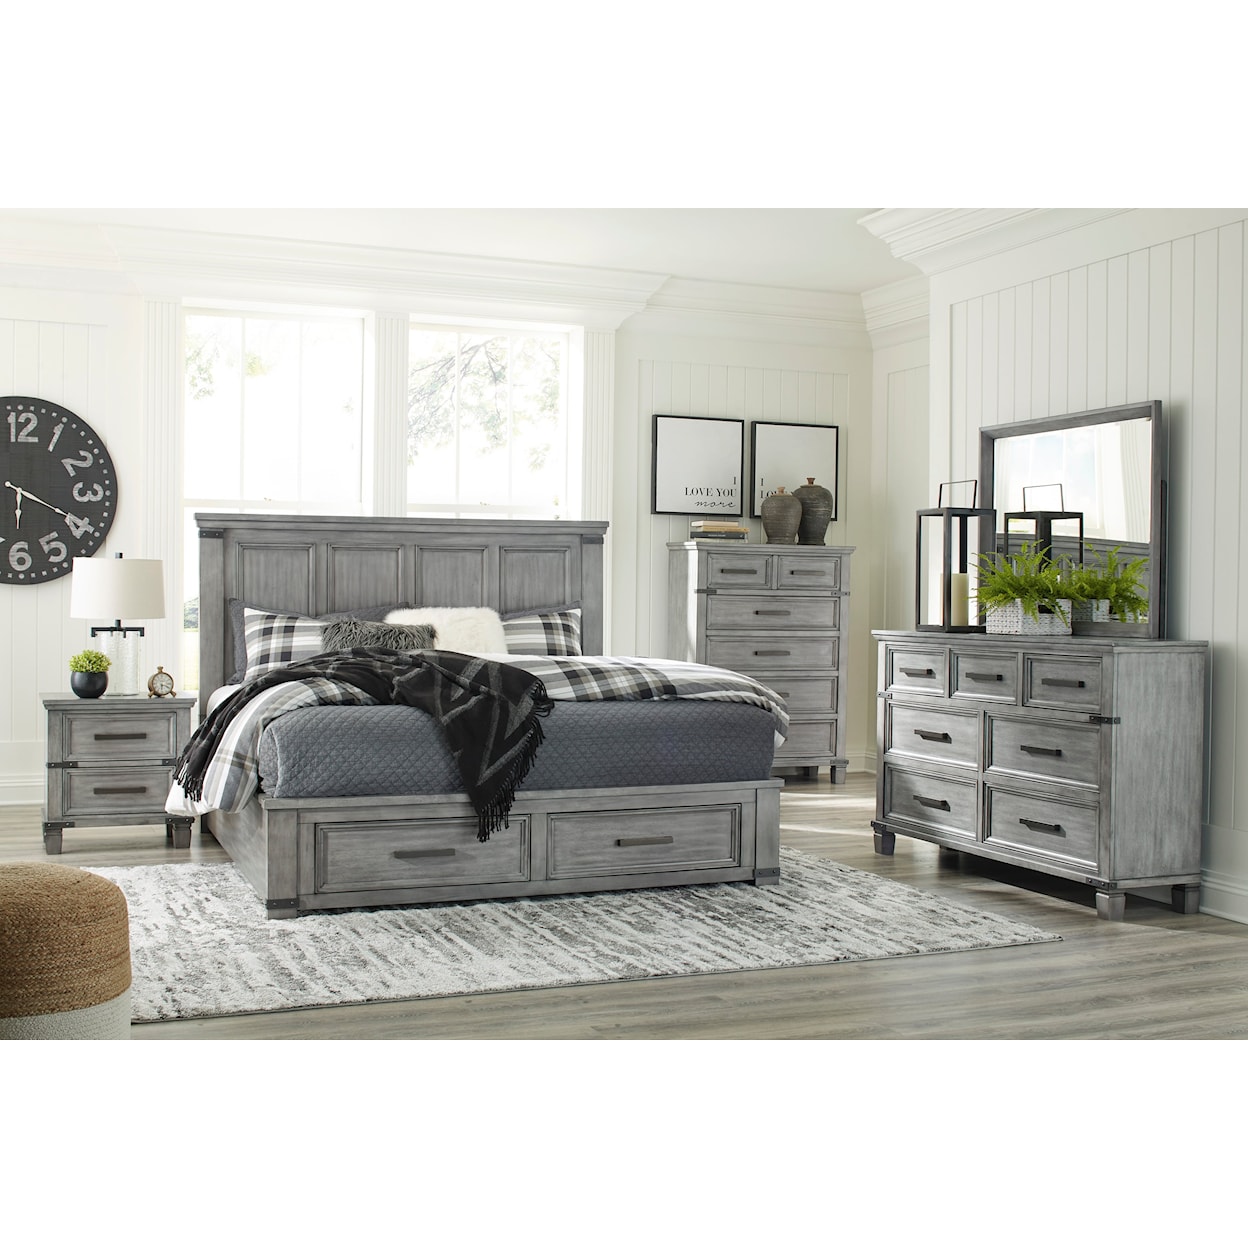 Signature Design by Ashley Russelyn King Bedroom Set